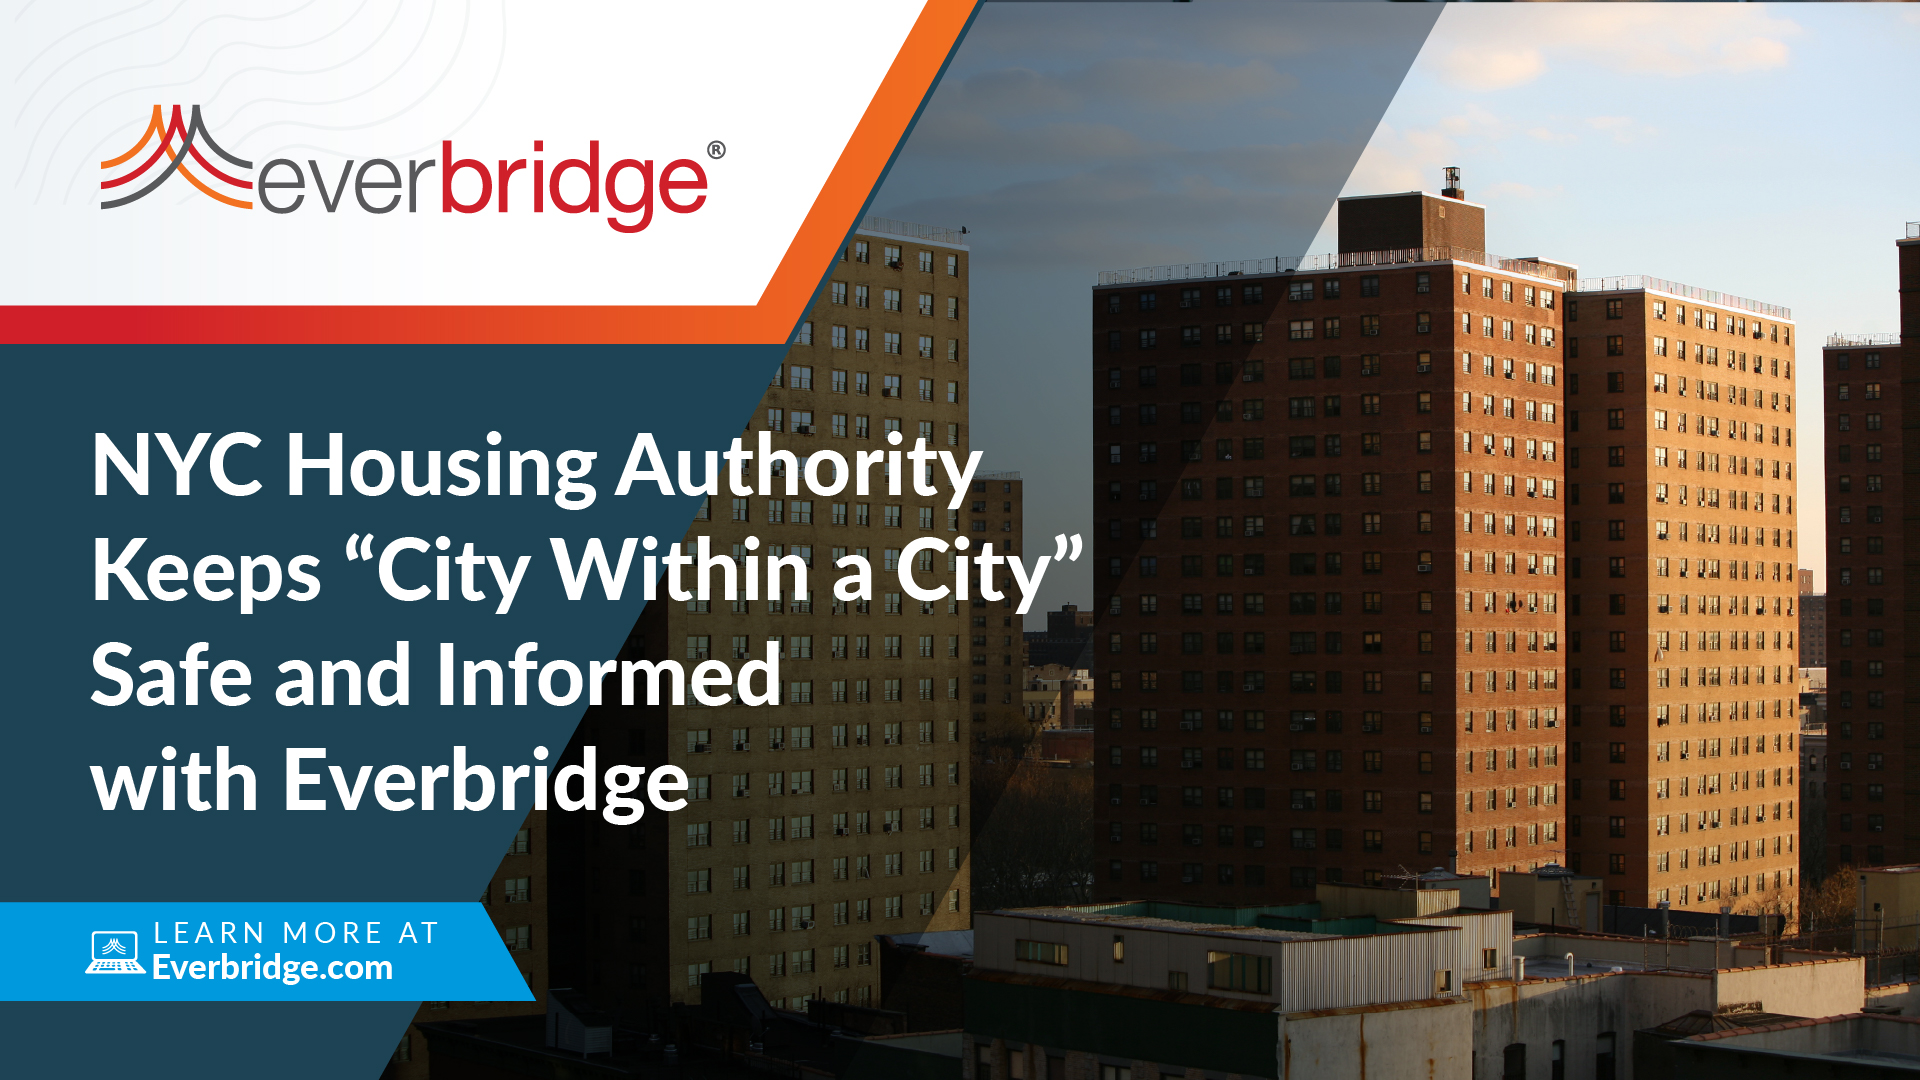 New York City Housing Authority Keeps “City Within a City” Safe and